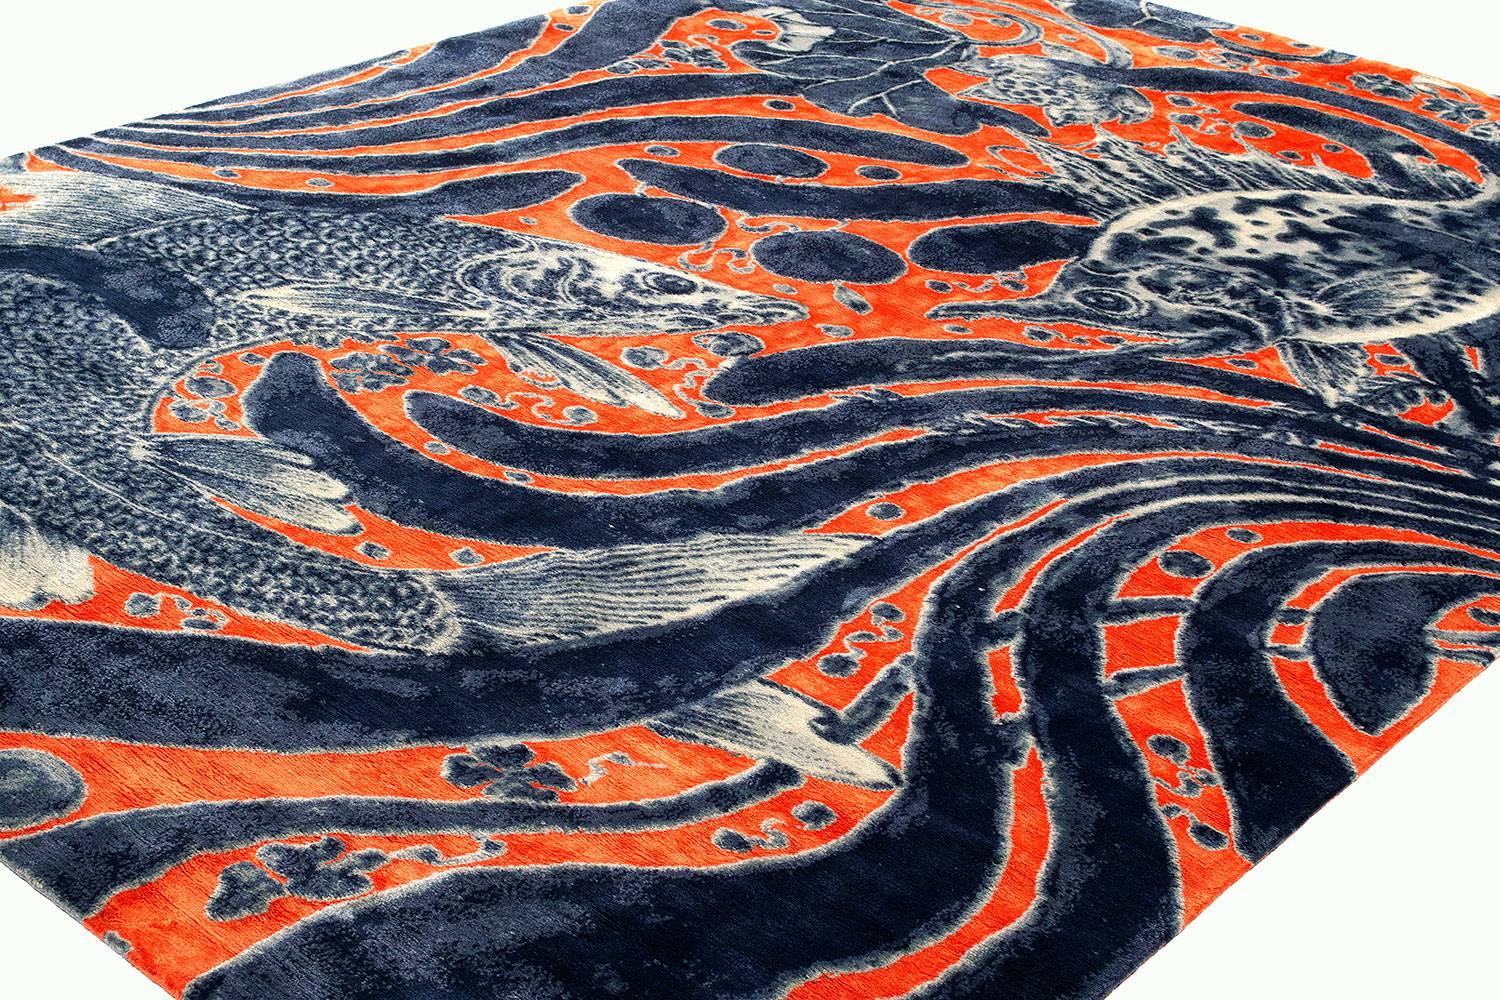 Aquatic Life is a part of our Beauty of Life exhibition in collaboration with the Japanese ceramic artist Yuki Hayama. Aquatic Life is one of four carpet designs made especially for this collection - each piece handwoven by skilled artisans in